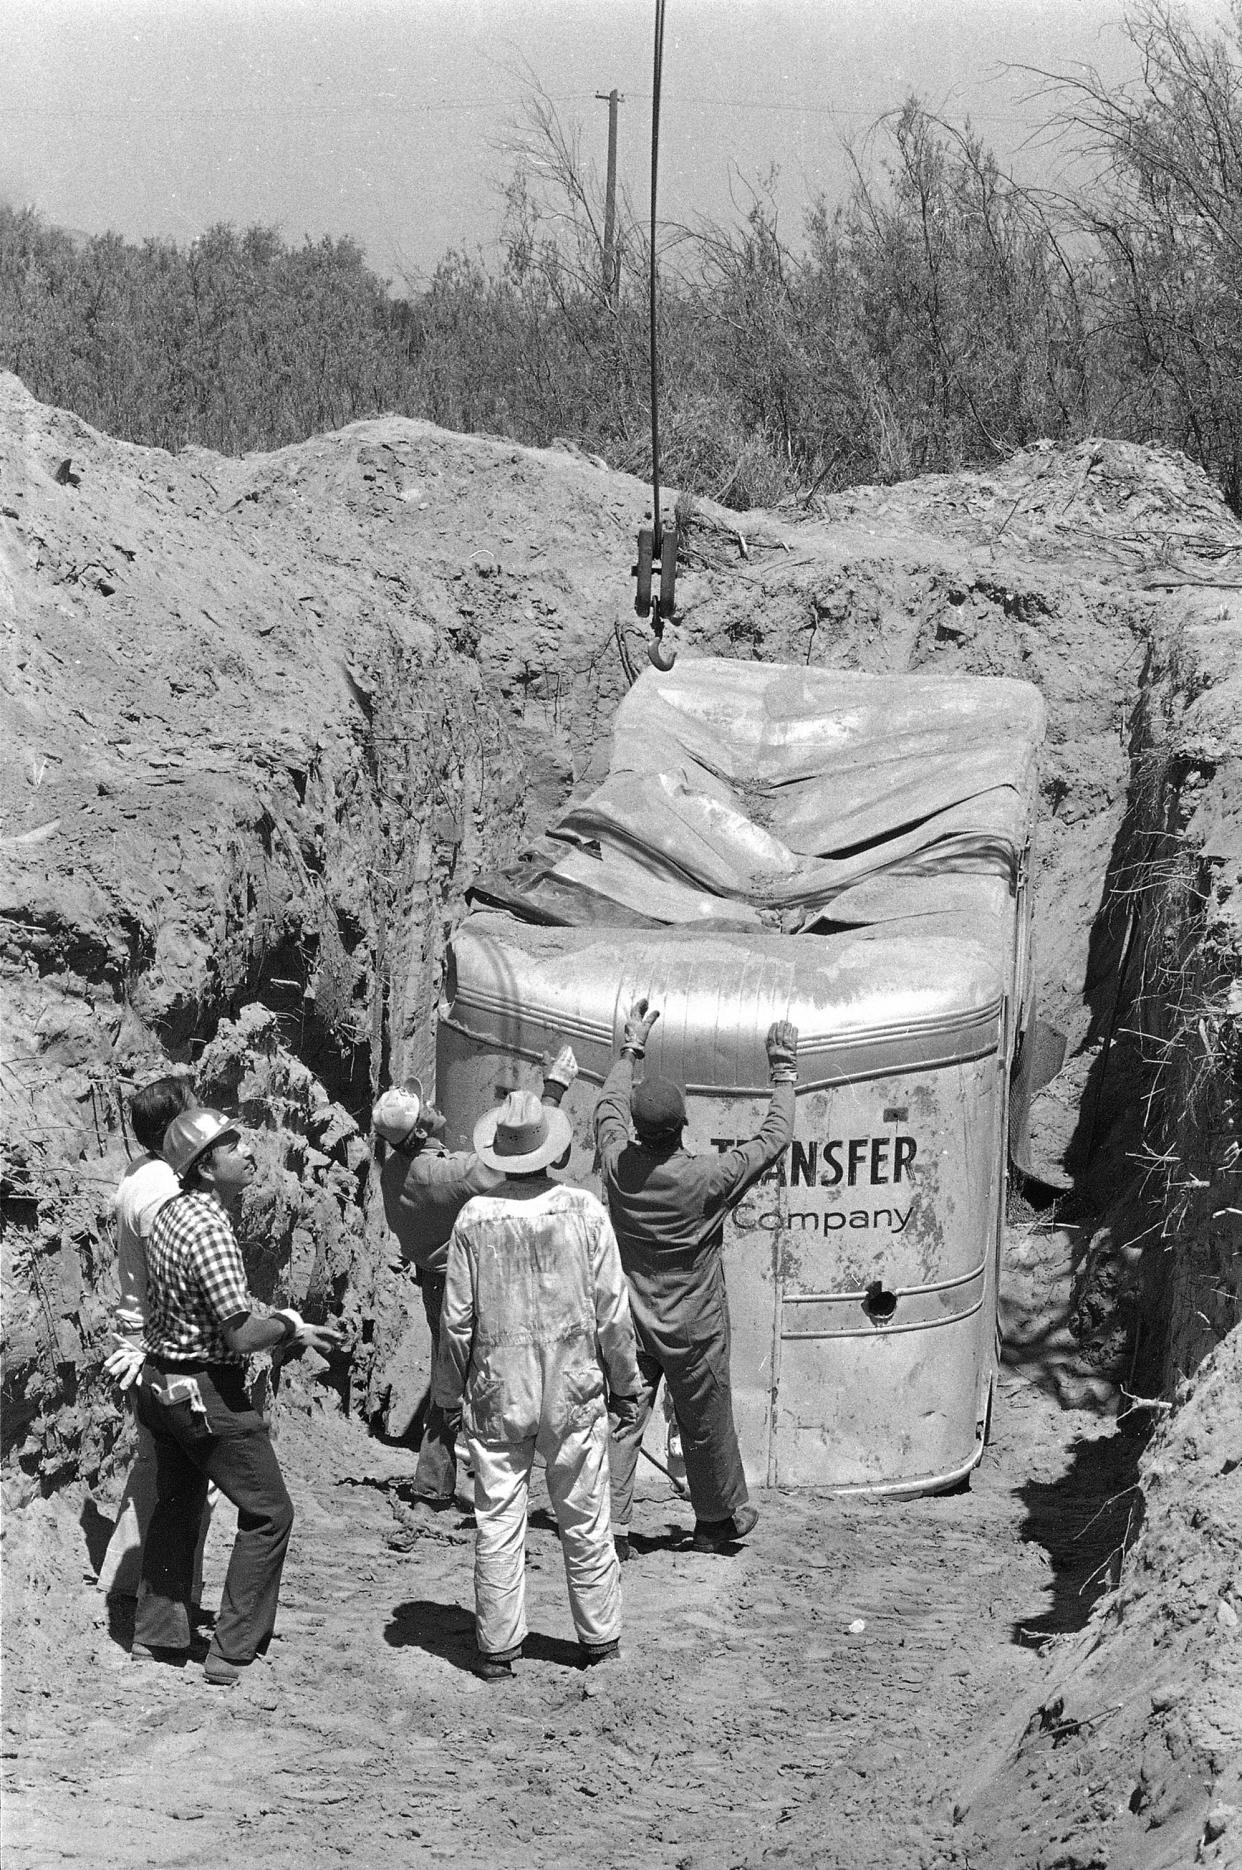 FILE - Officials remove a truck buried at a rock quarry in Livermore, Calif., in which 26 Chowchilla school children and their bus driver, Ed Ray, were held captive on July 20, 1976. California parole commissioners have recommended parole for the last of three men convicted of hijacking the school bus full of children for $5 million ransom in 1976. The two commissioners acted Friday, March 25, 2022, in the case of 70-year-old Frederick Woods. (AP Photo/James Palmer, File)